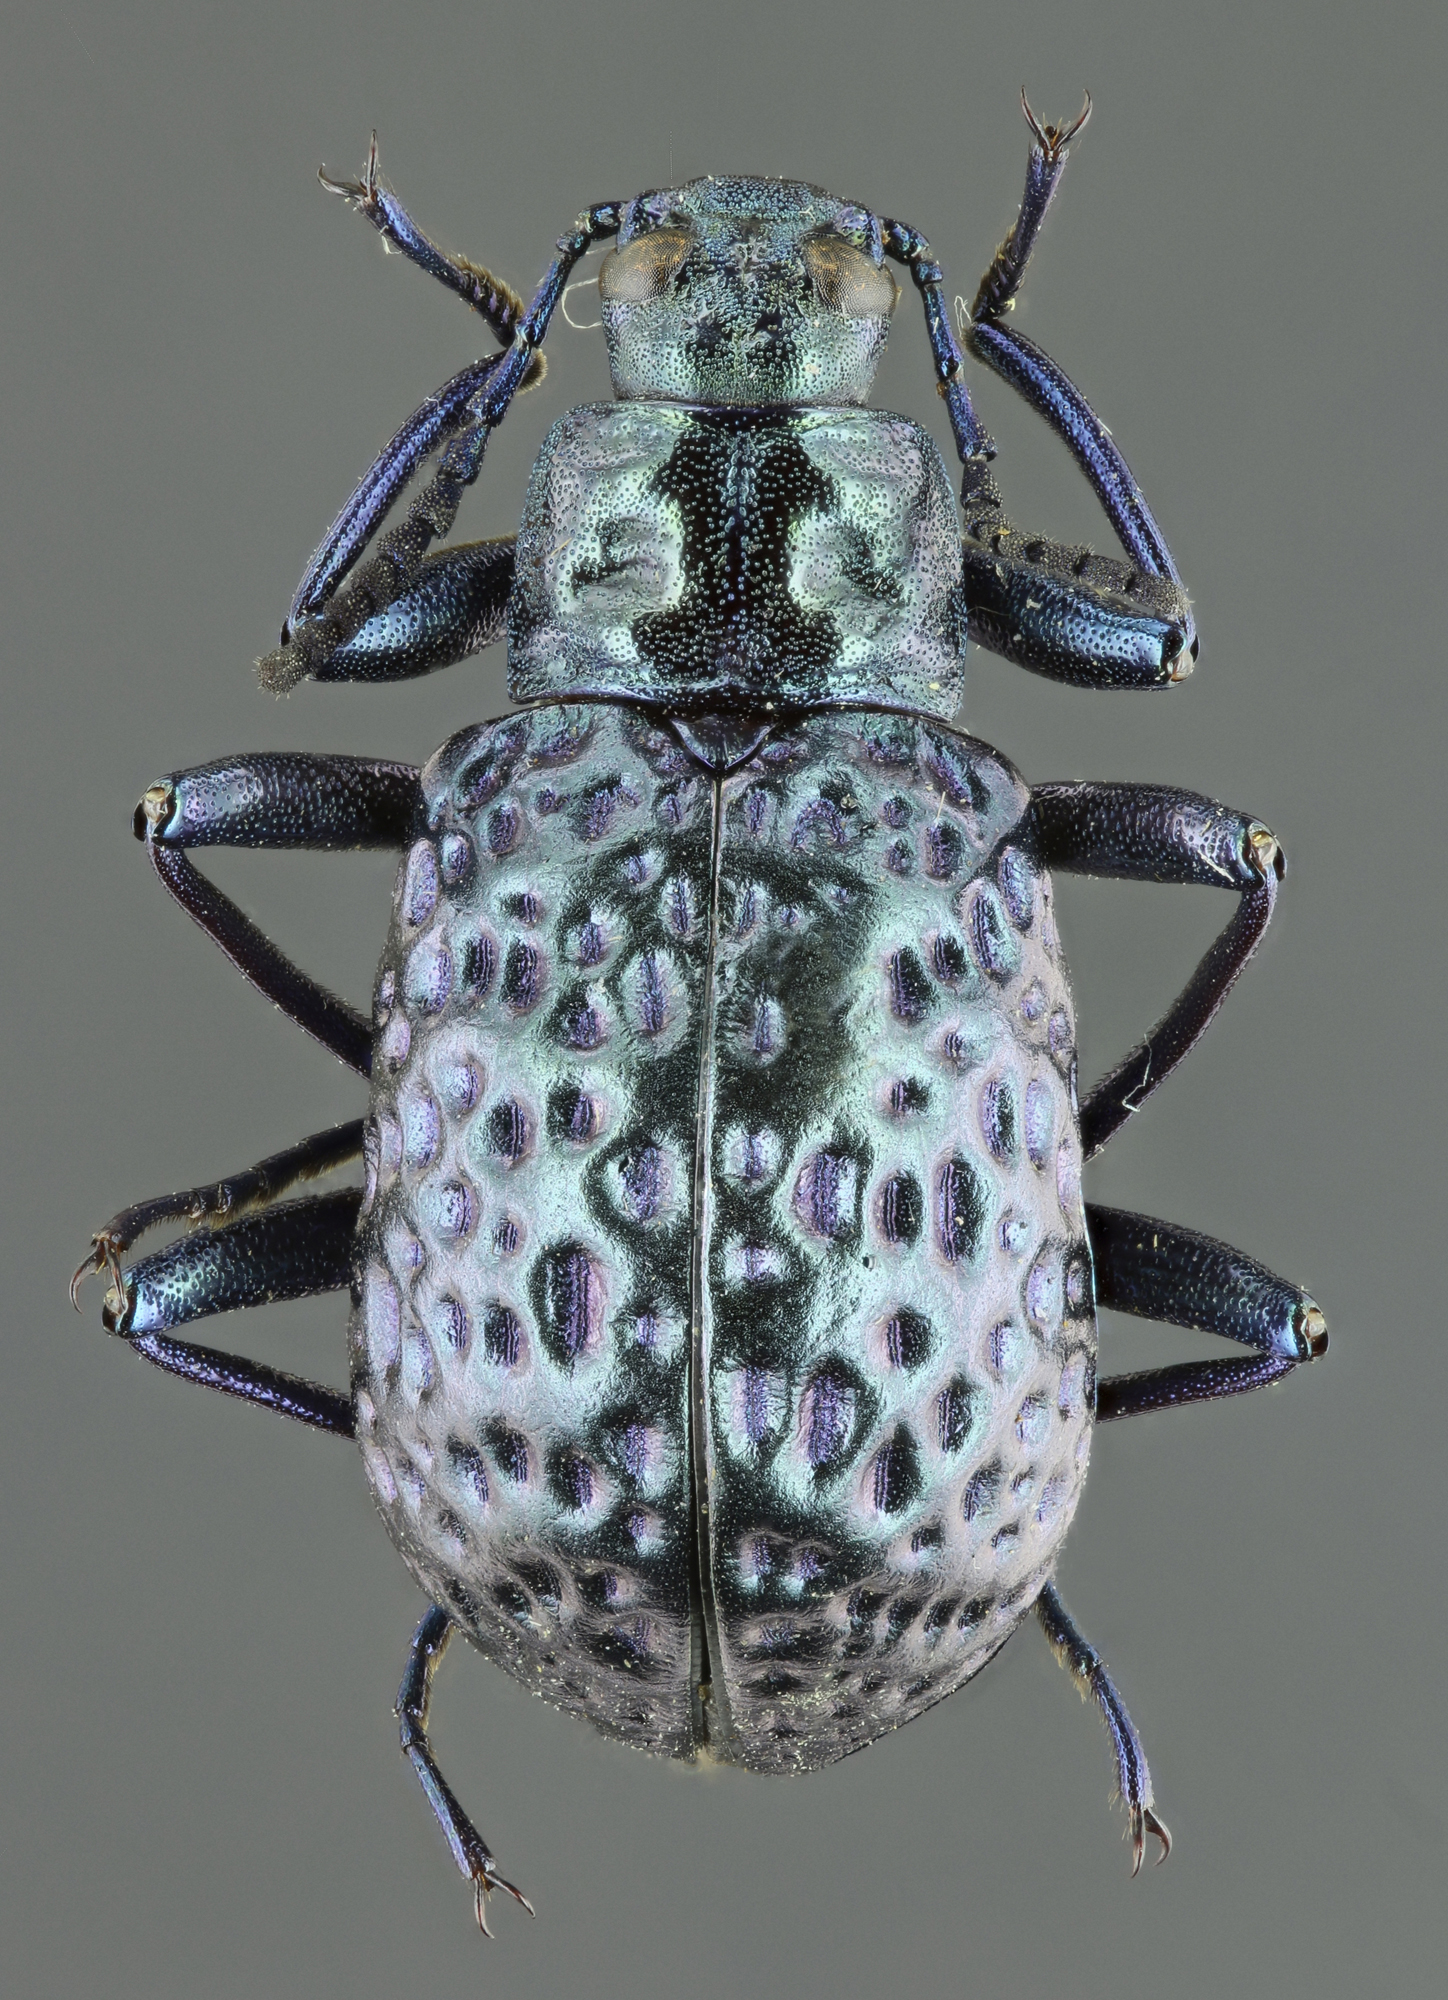 Cuphotes lagrioides 38263zs82.jpg